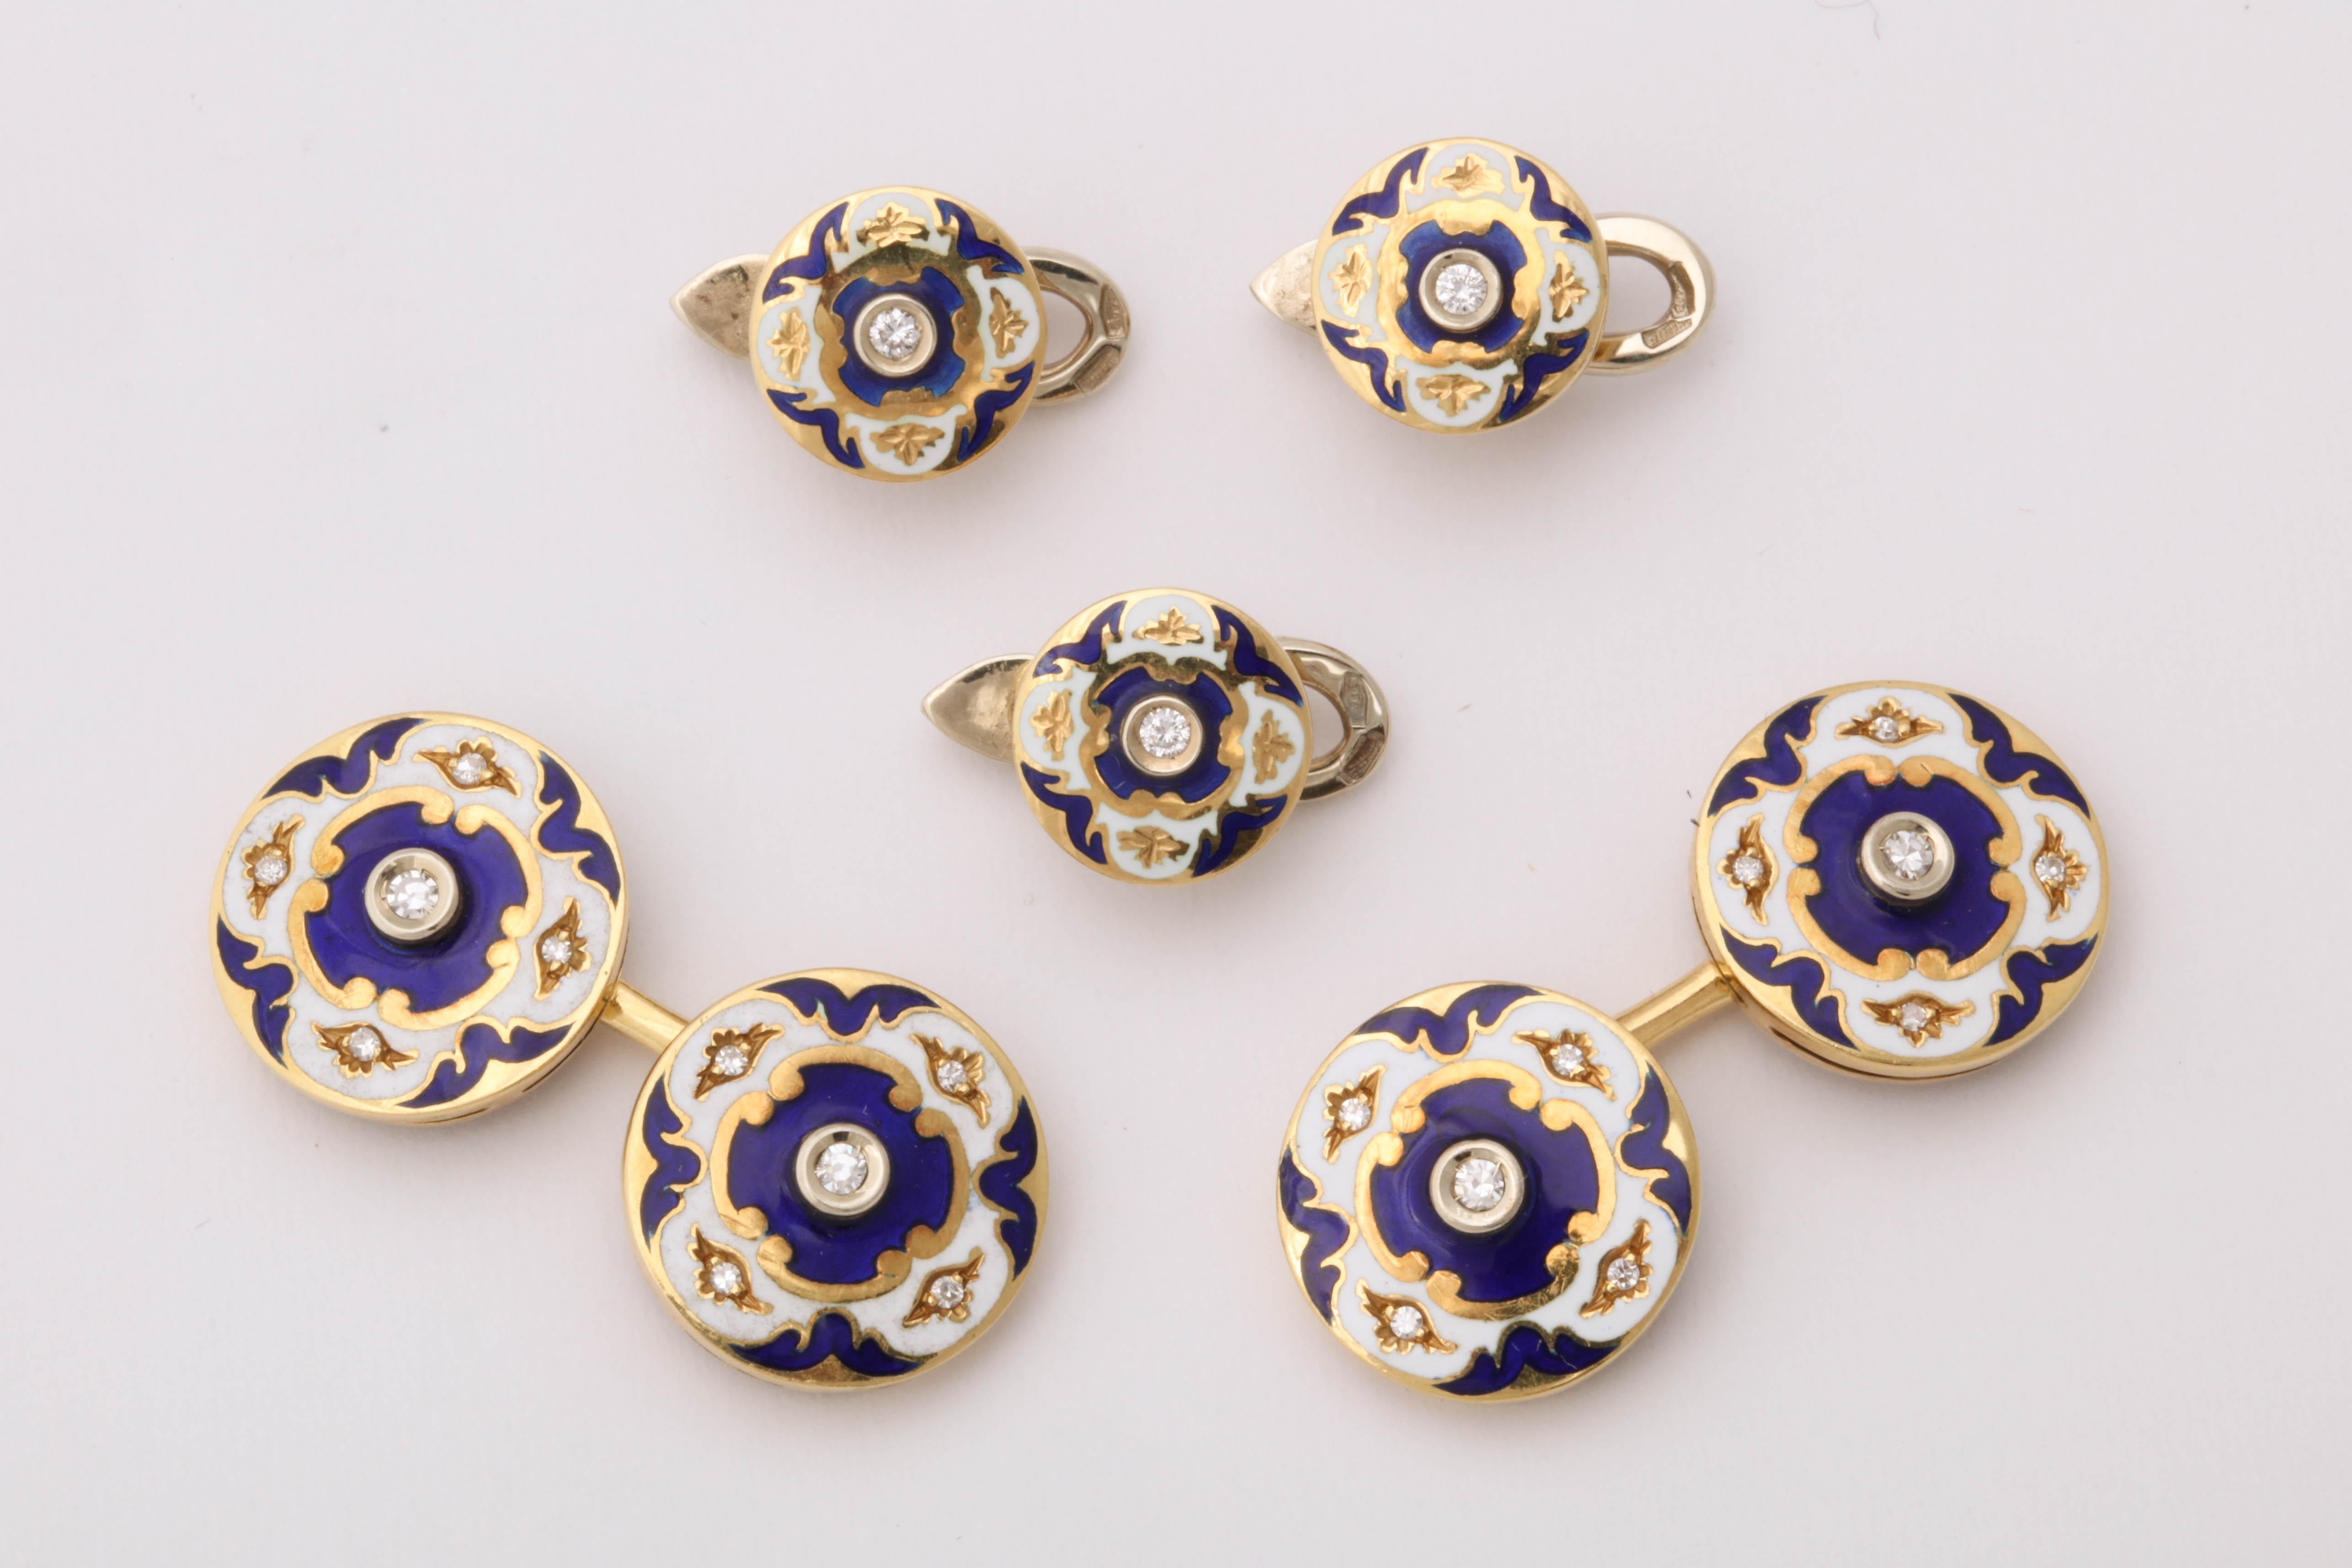 Vintage Stud Set with Double sided 18kt Yellow Gold Cuff Links - each side set with a center Diamond and enameled in a rich Blue and White  Brocade pattern and also set with 4  tiny Diamonds.  The studs are three, in number, as seen in older sets